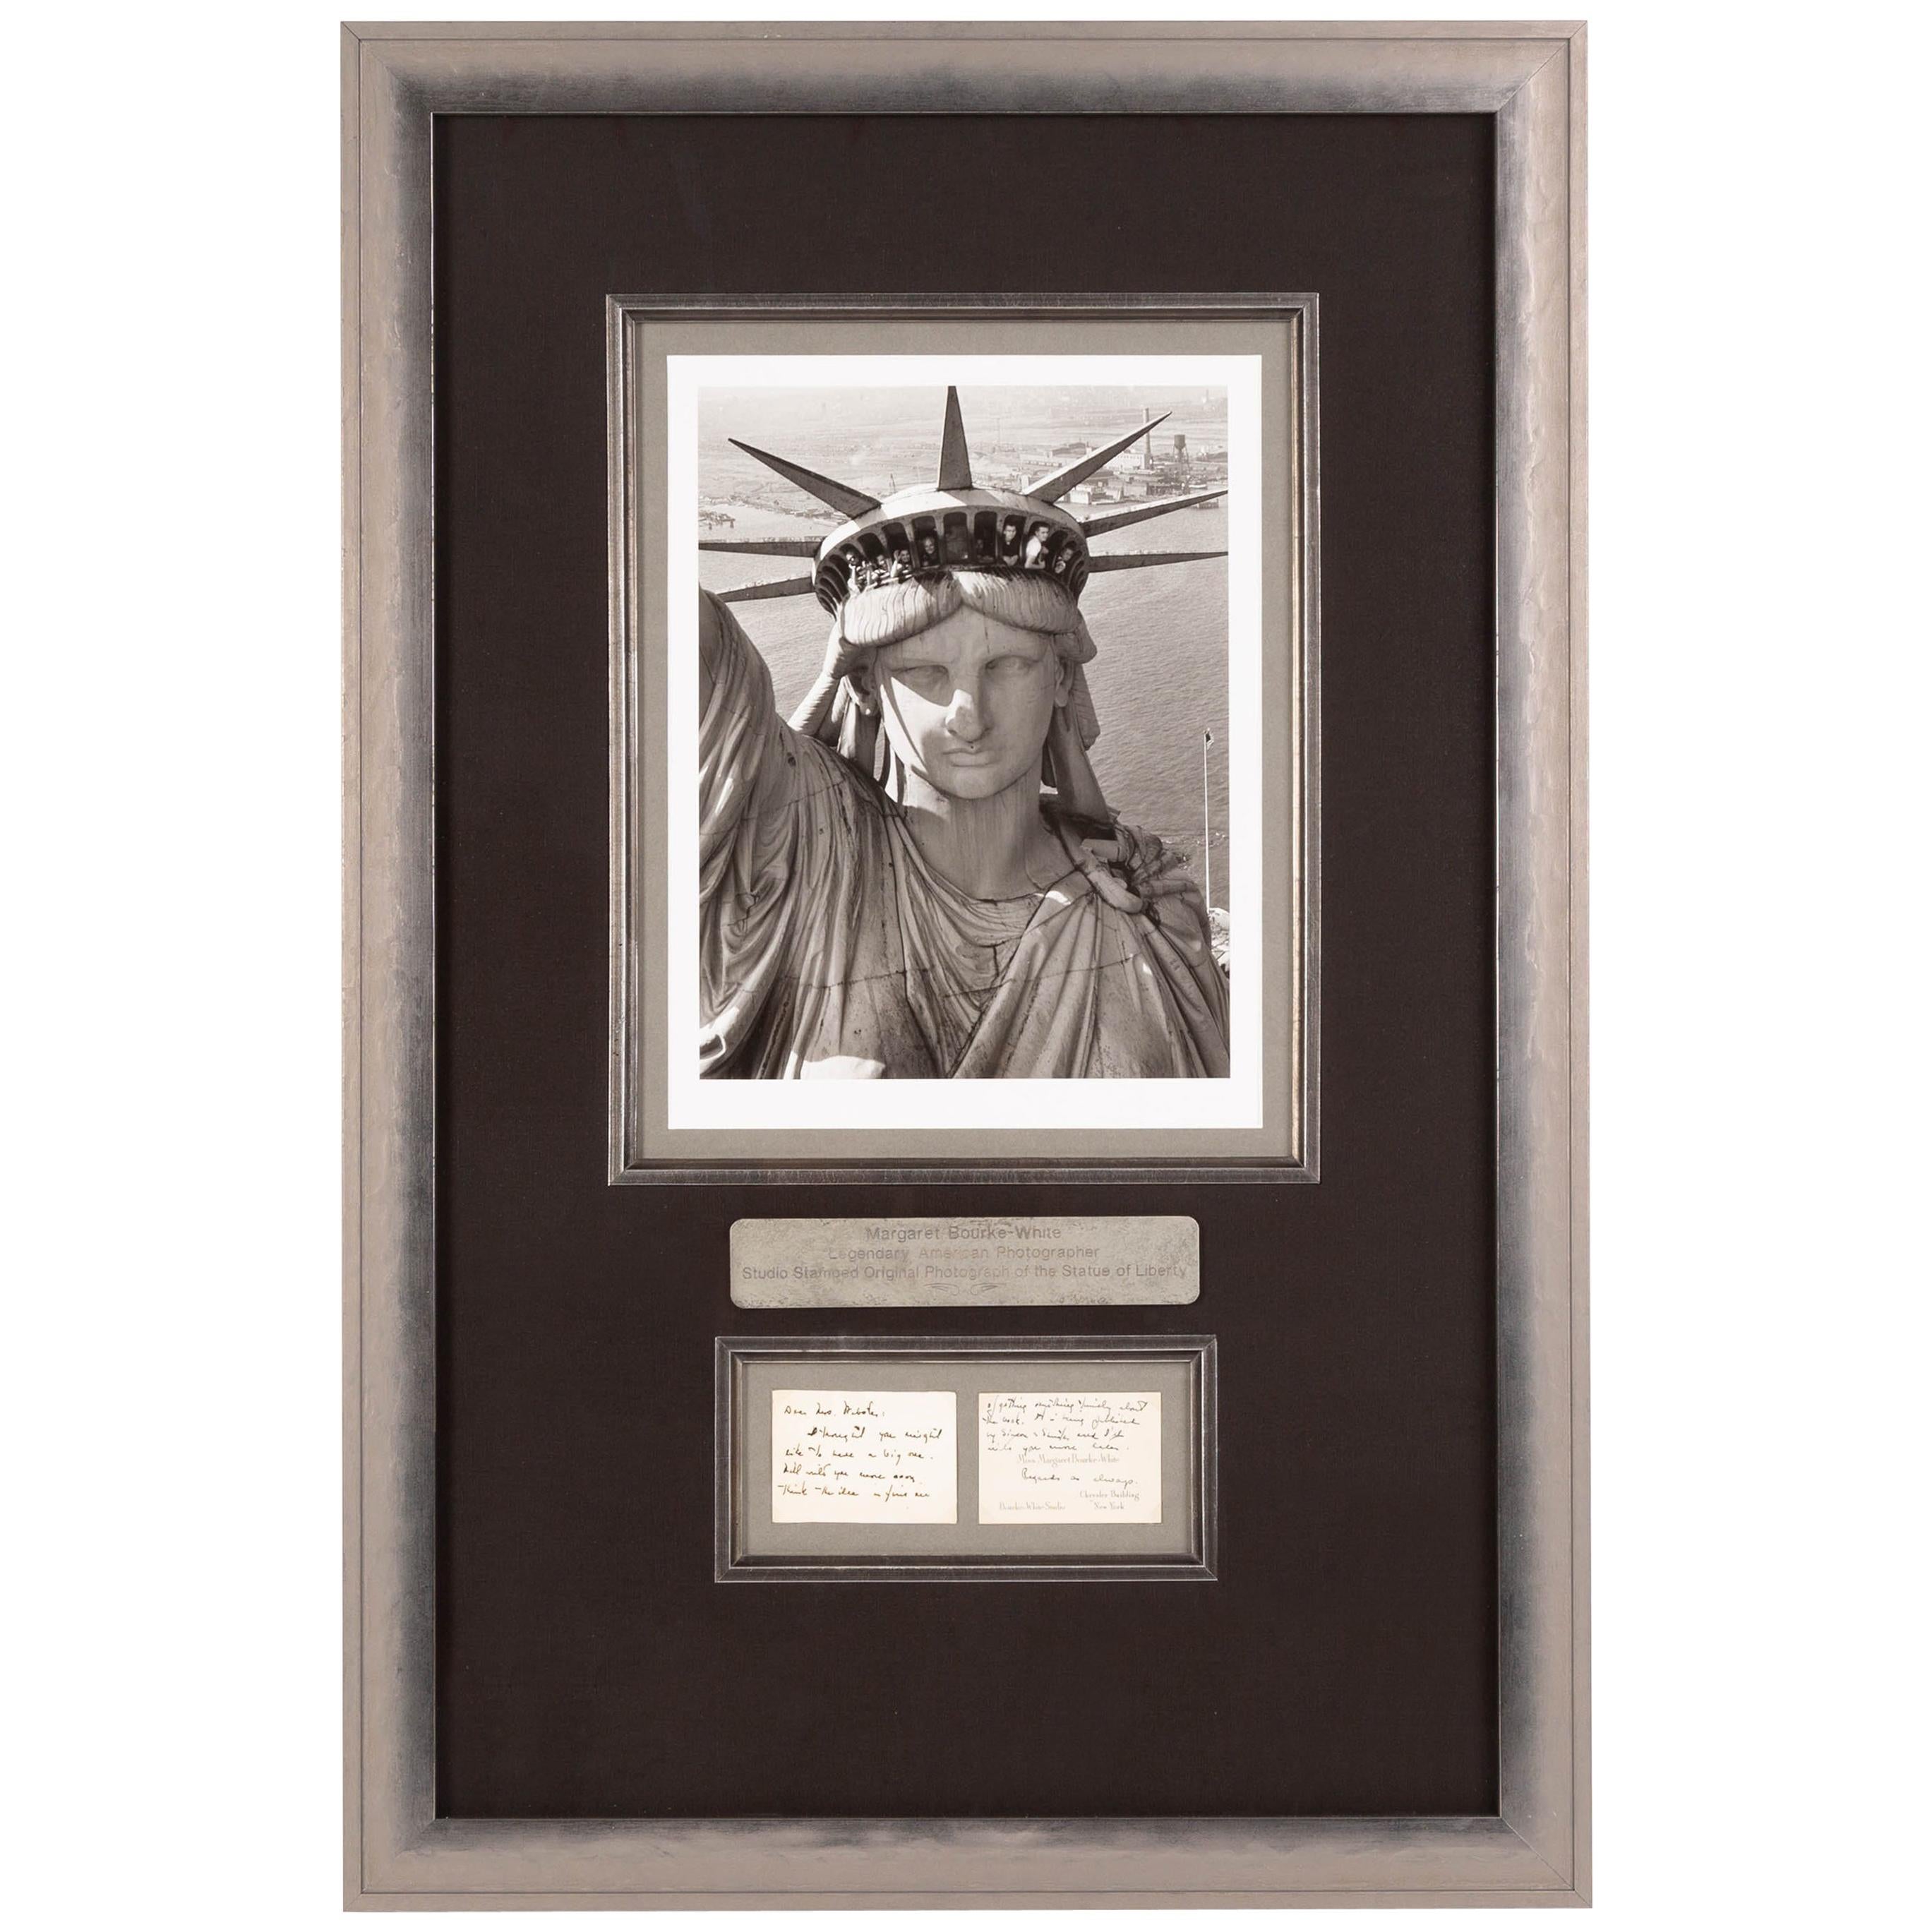 Margaret Bourke-White Statue of Liberty Inscribed Note and Limited Edition Photo